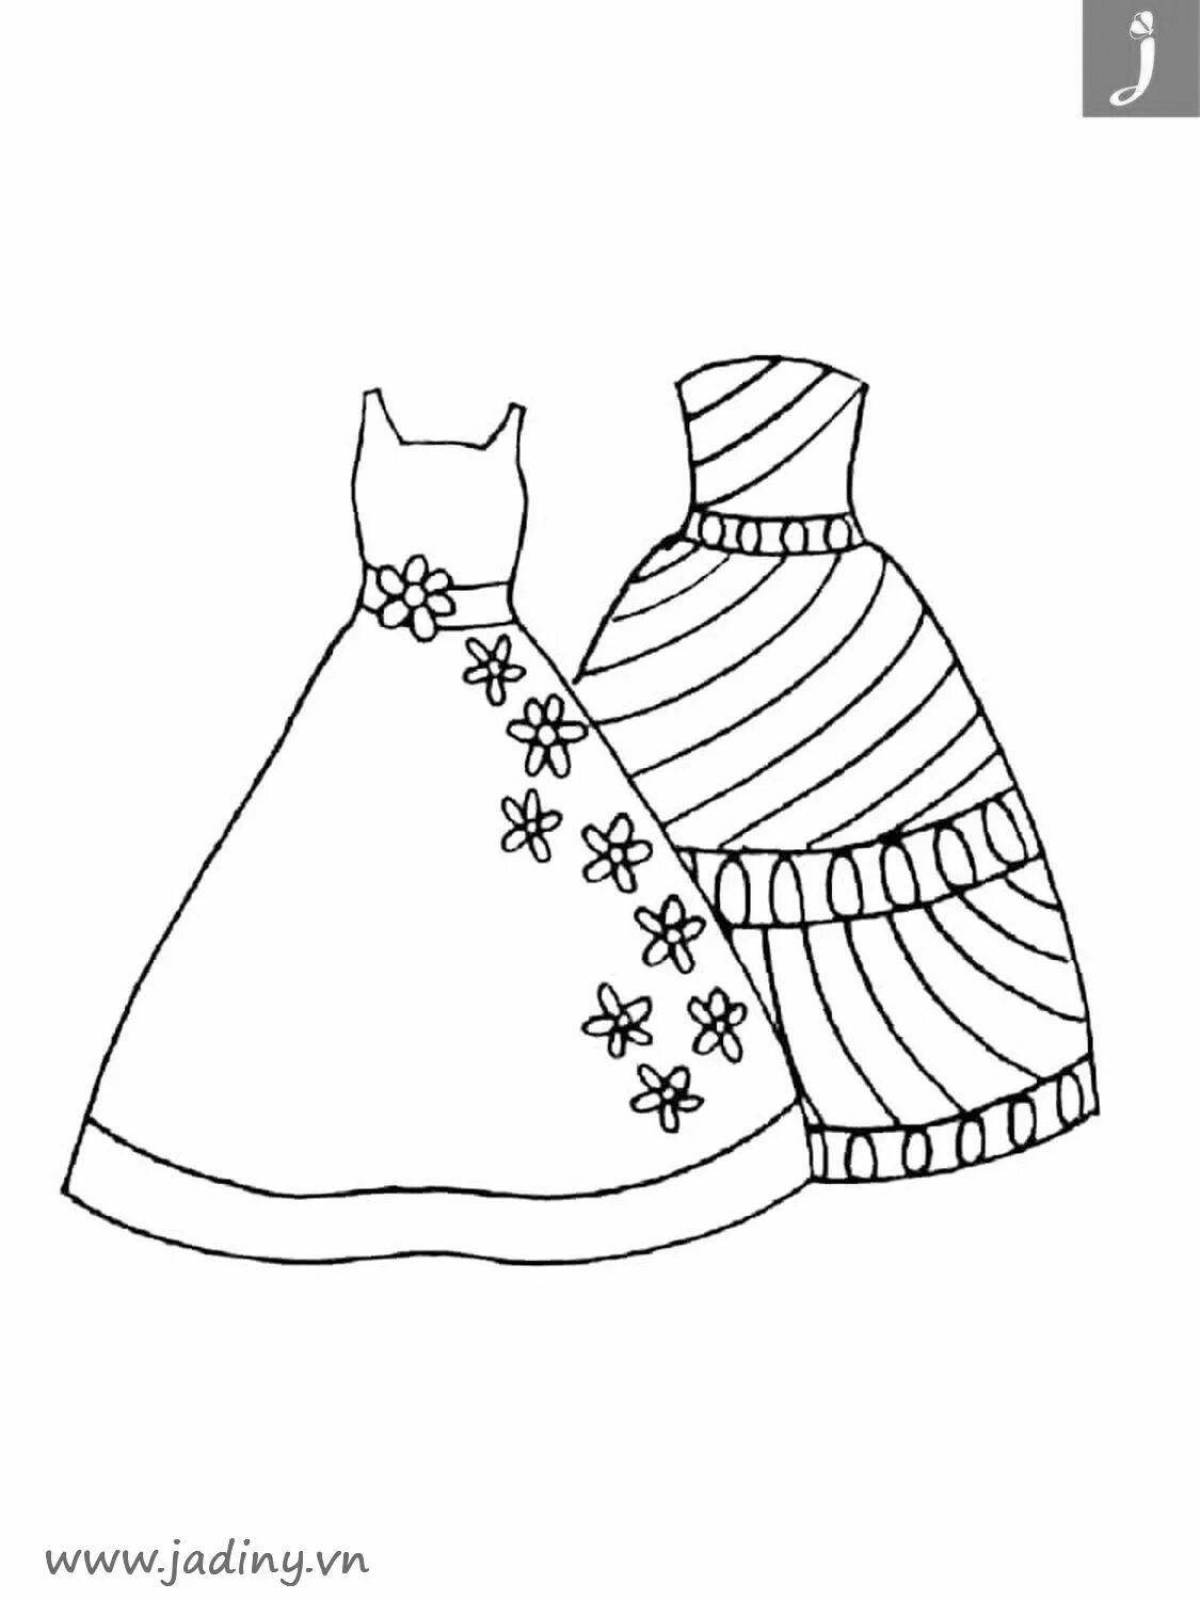 Fun coloring dress for children 5-6 years old